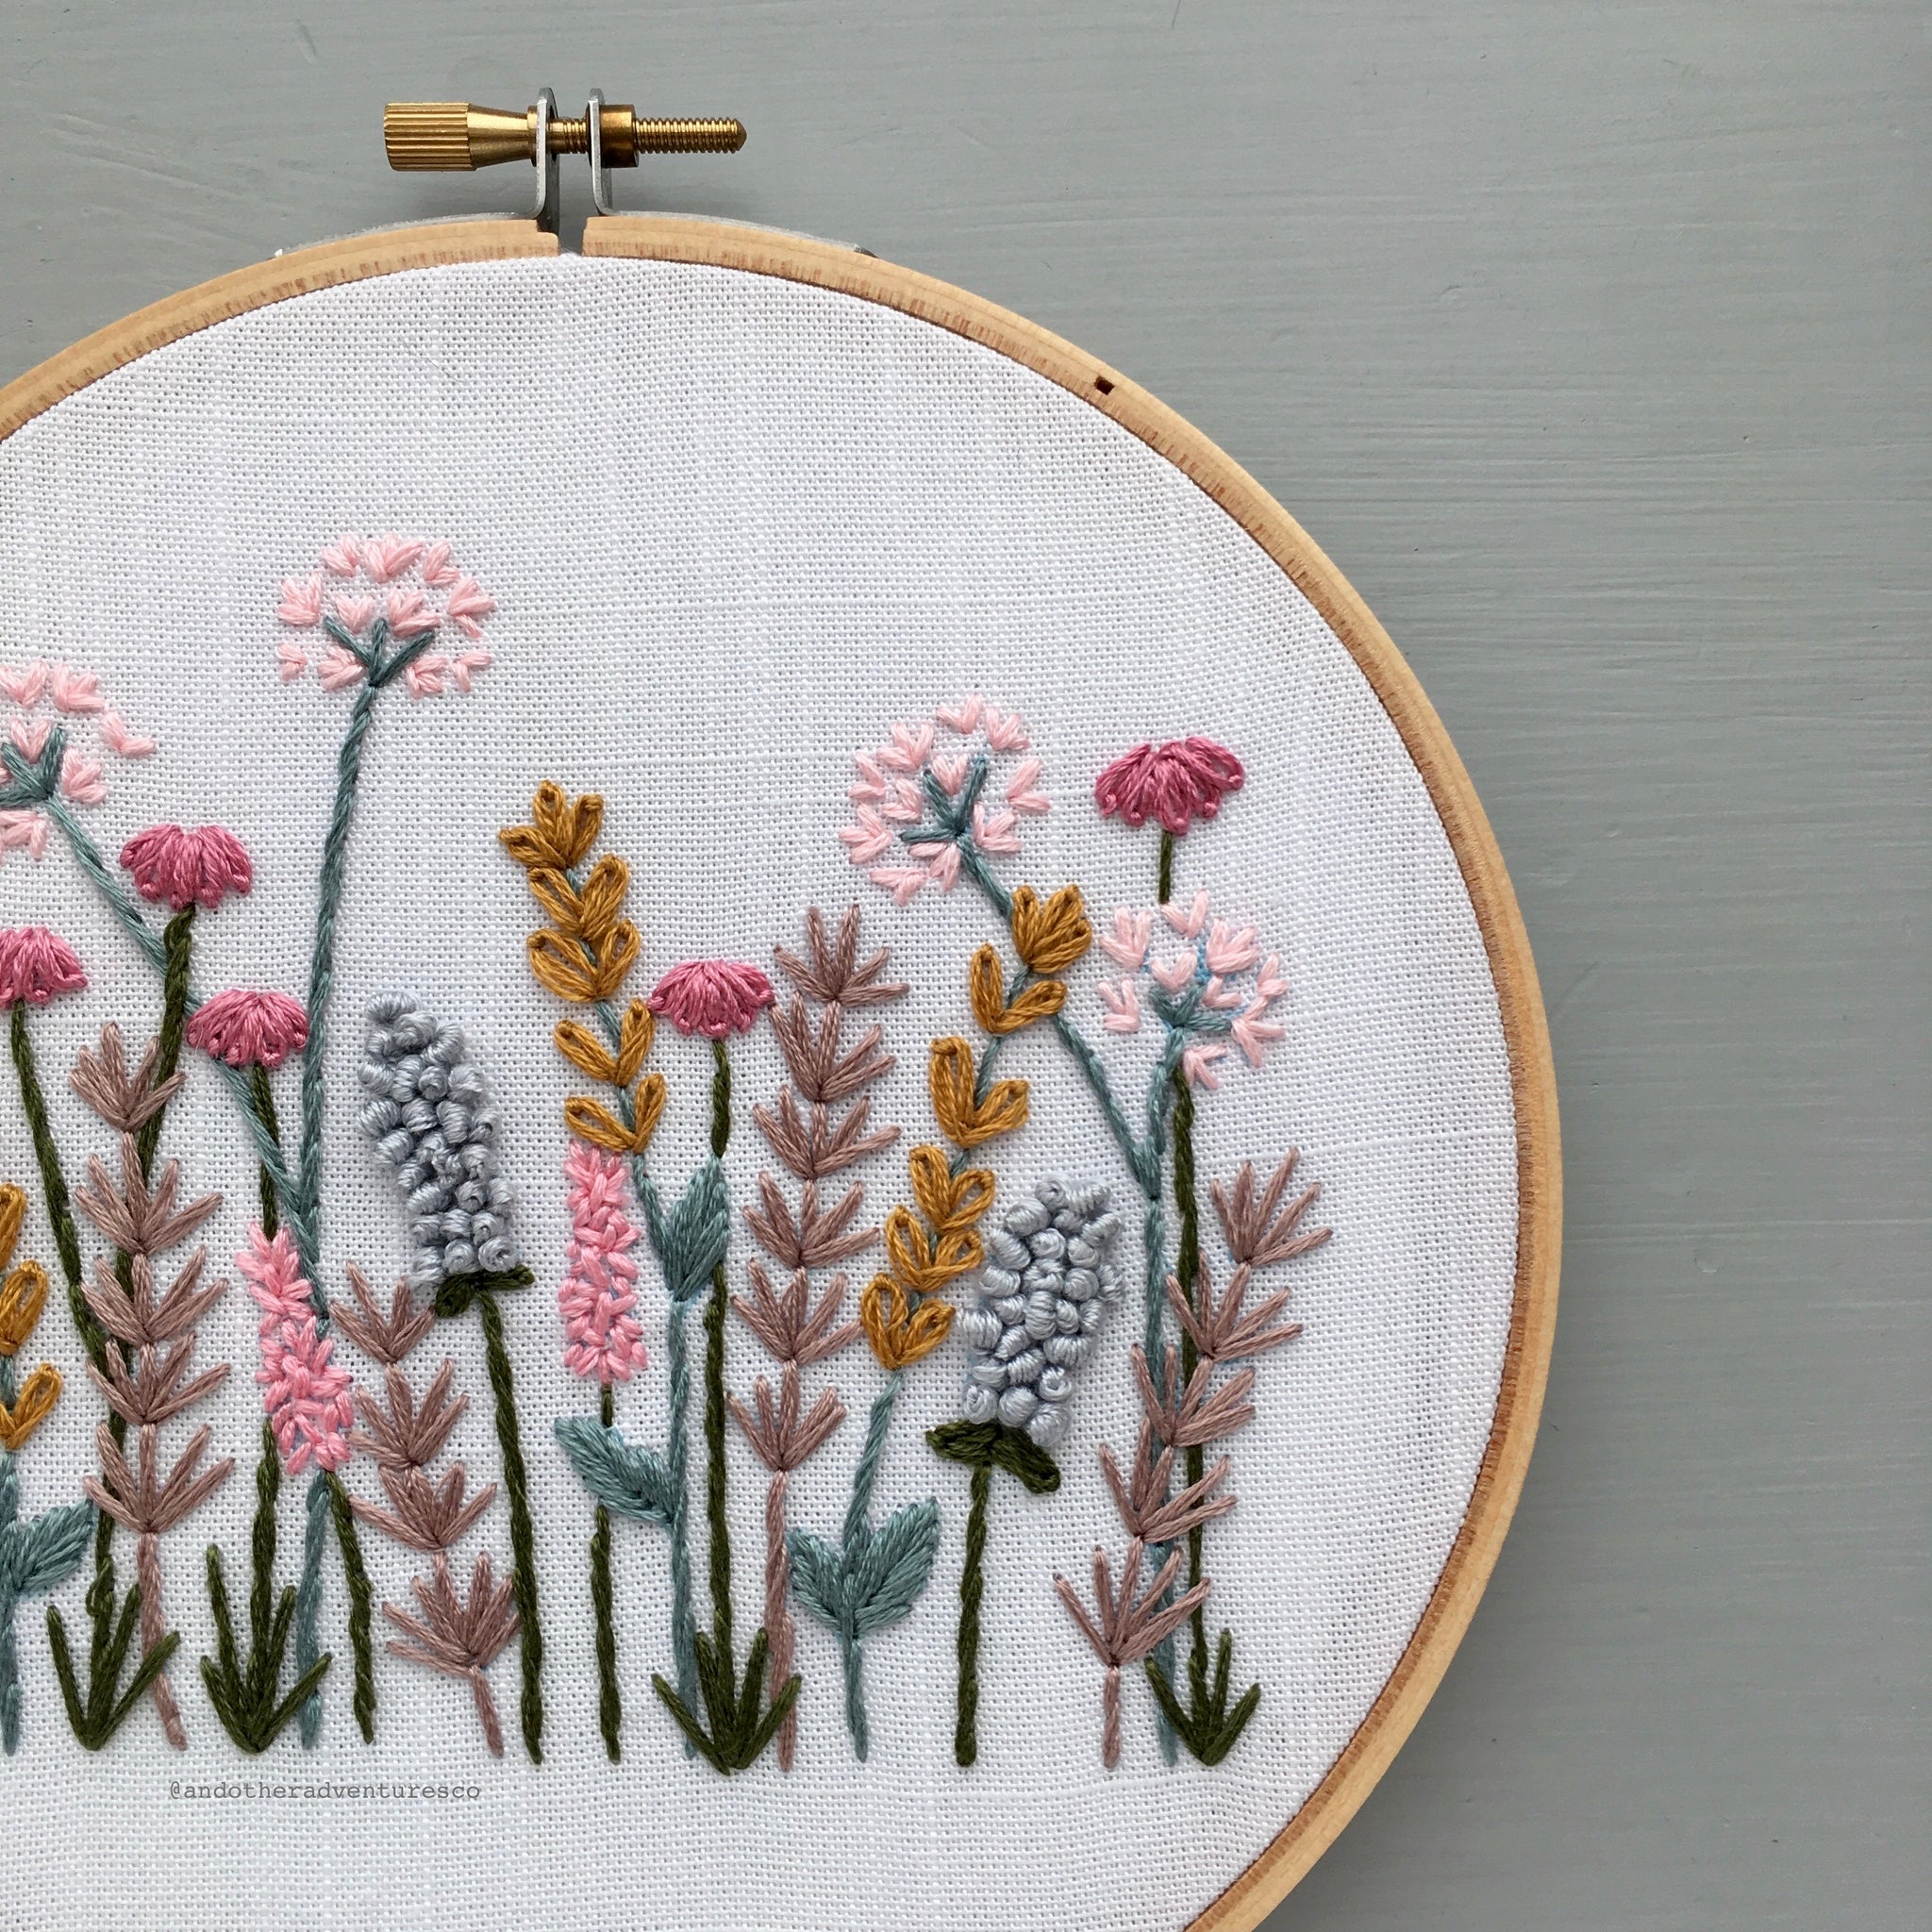 fun flower embroidery designs free download